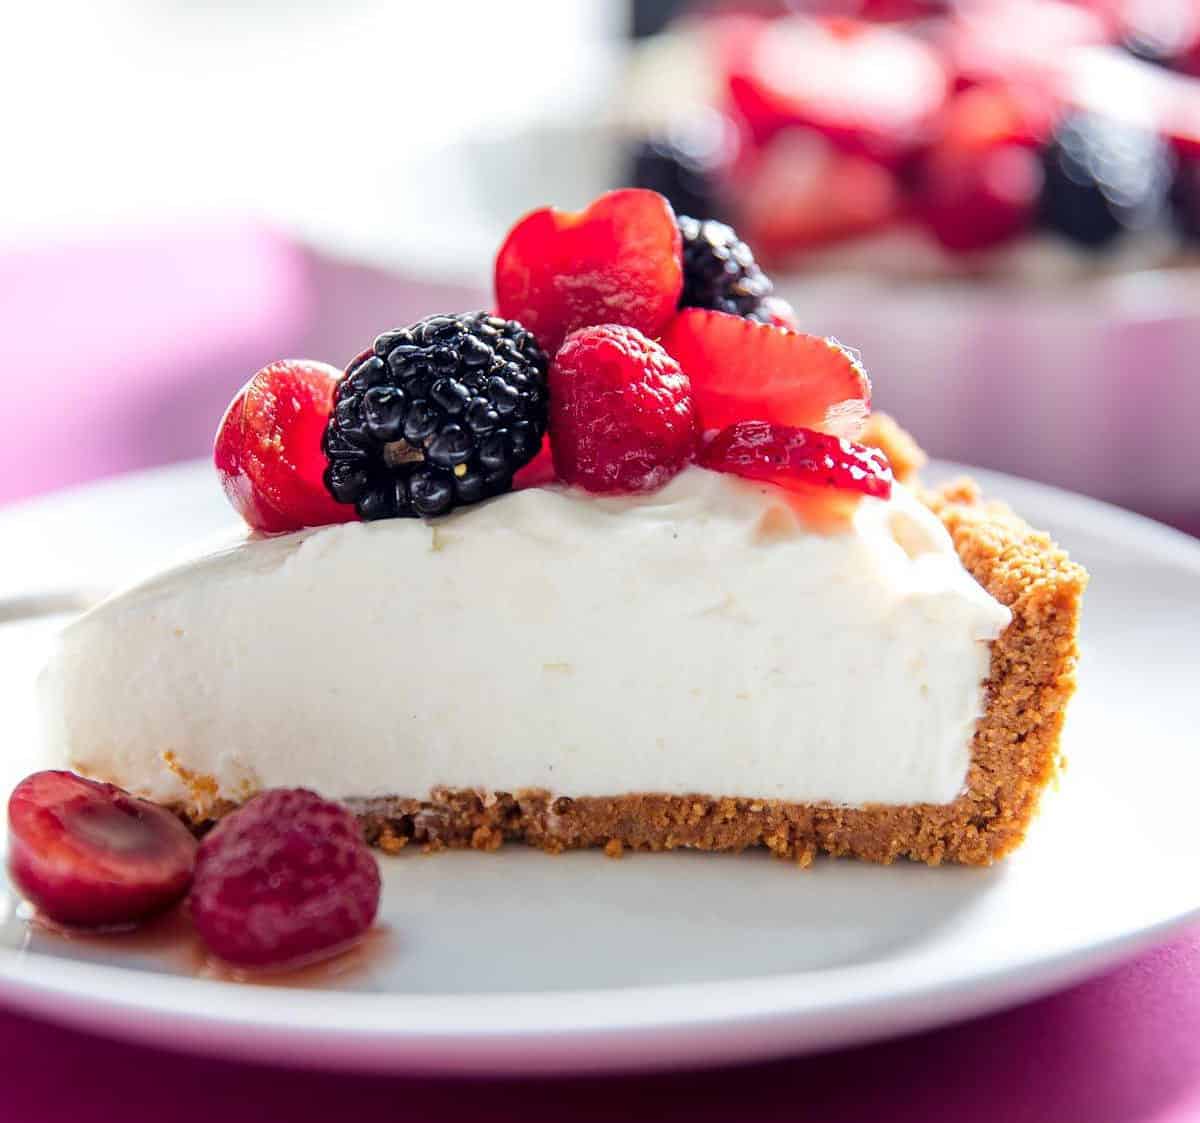  Sweet and creamy cheesecake filling piled high in a delicate graham cracker crust.